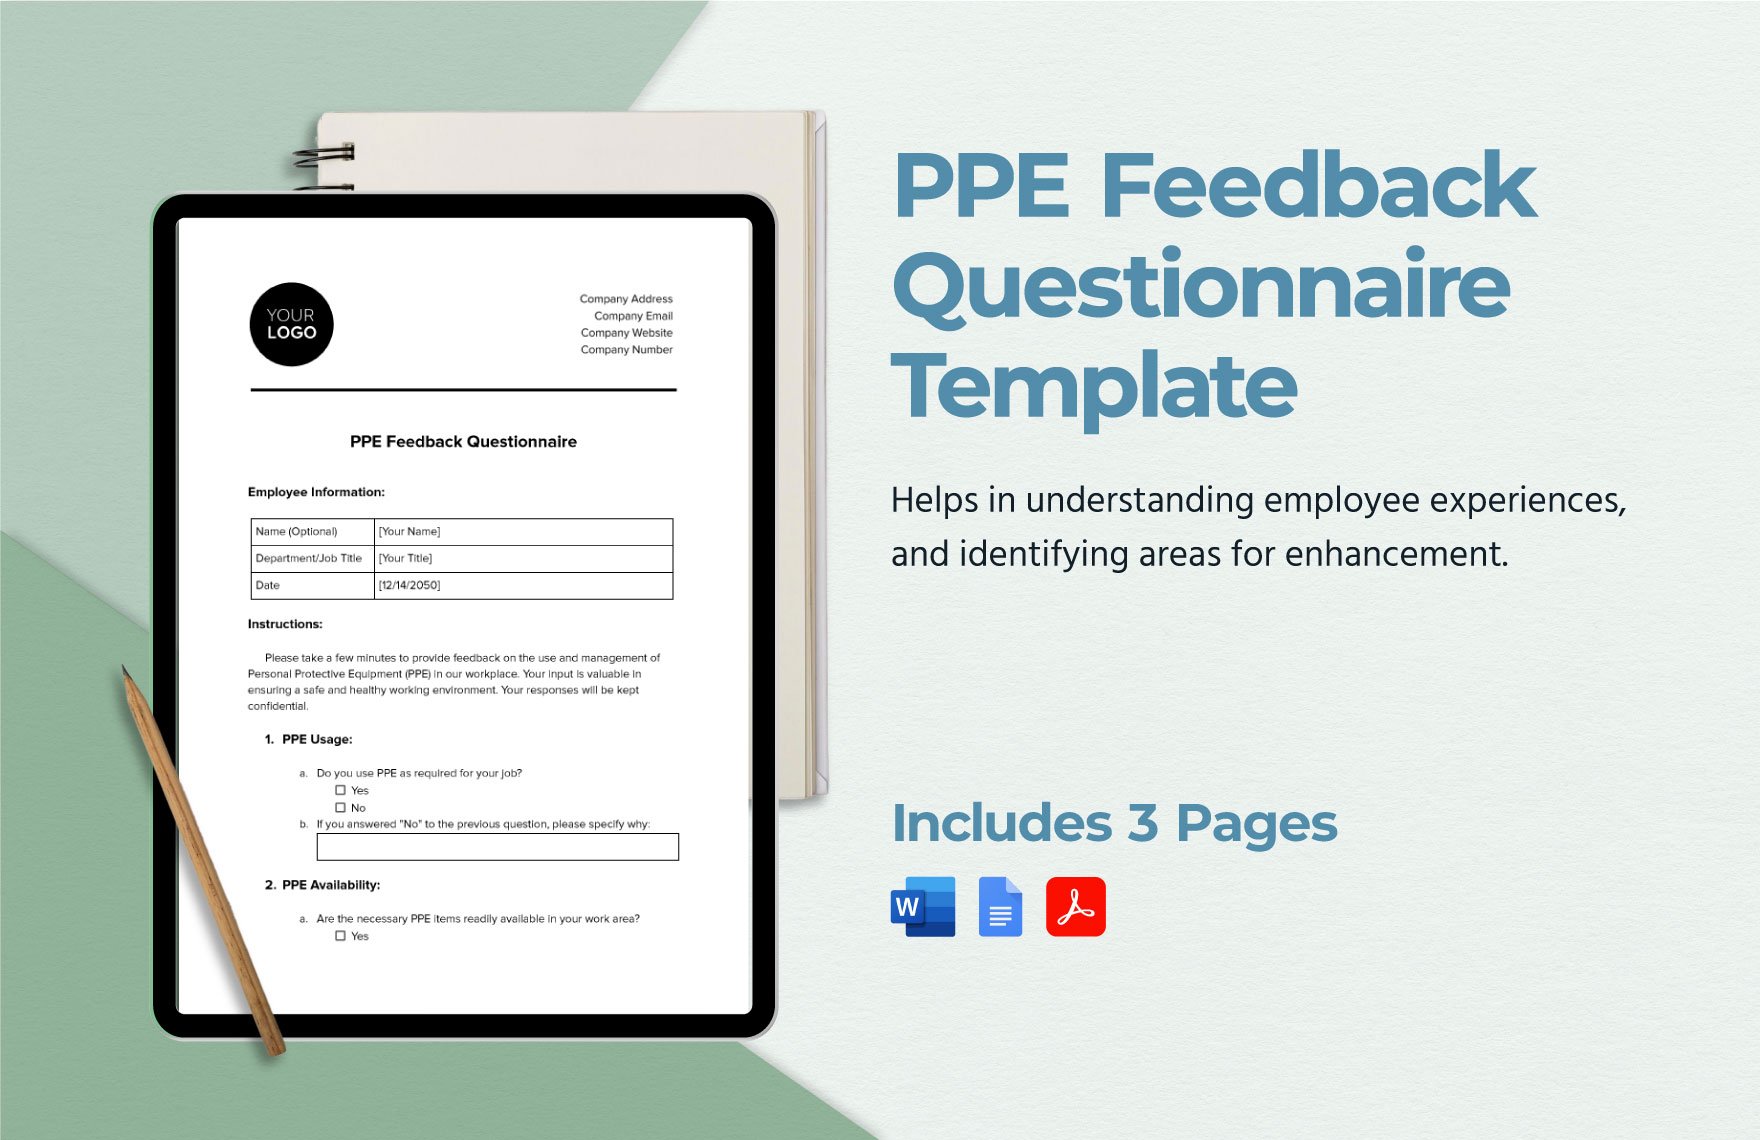 PPE Feedback Questionnaire Template